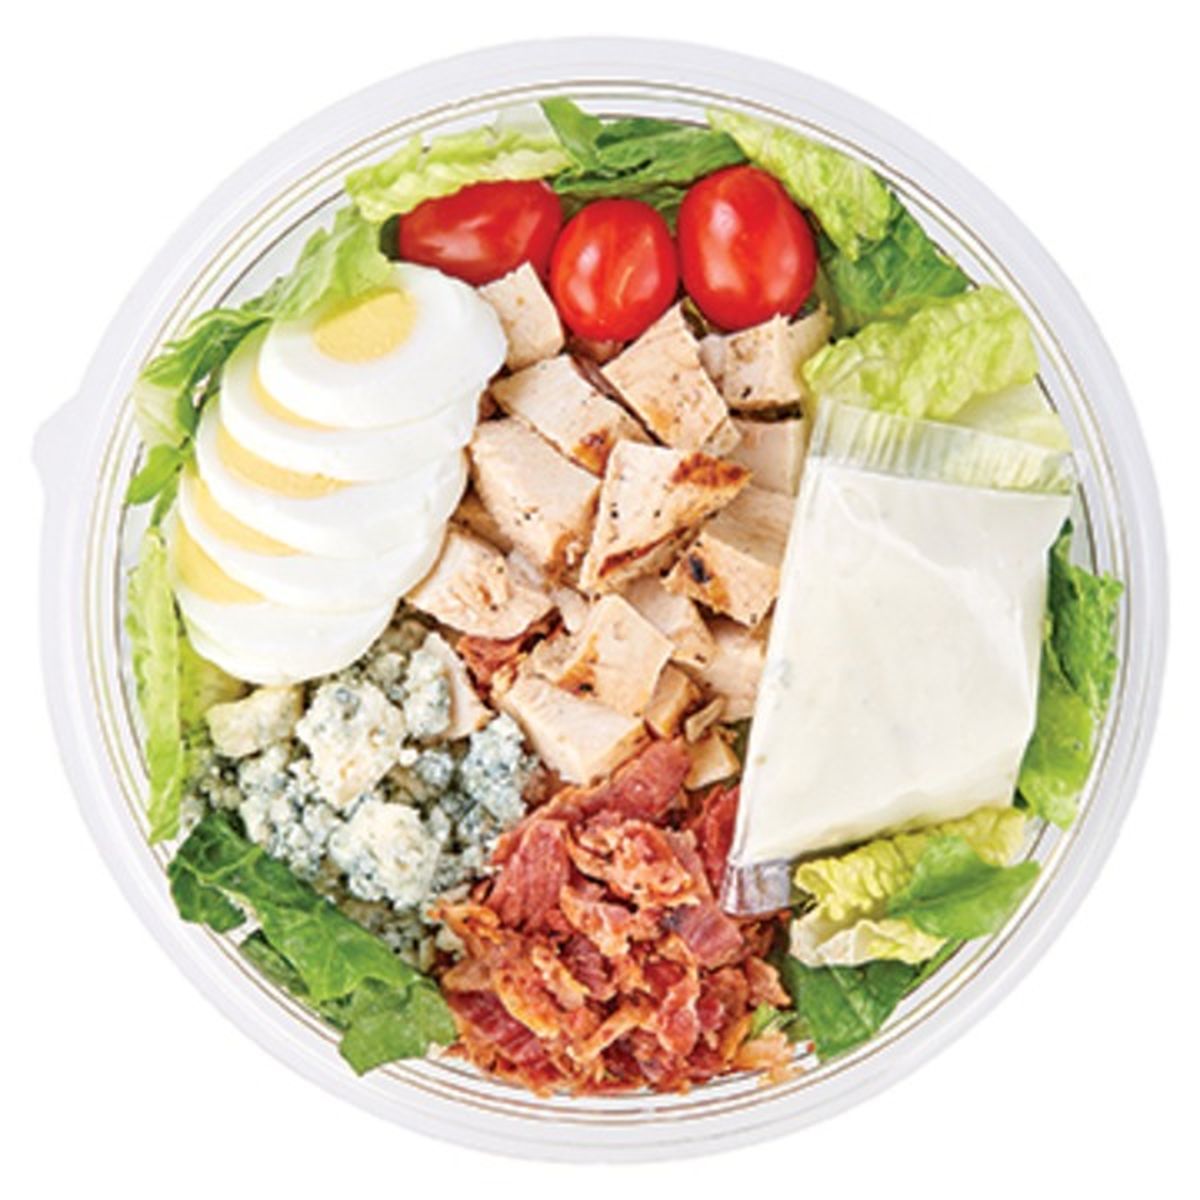 Calories in Wegmans Large Cobb Salad with Chicken and Blue Cheese Dressing